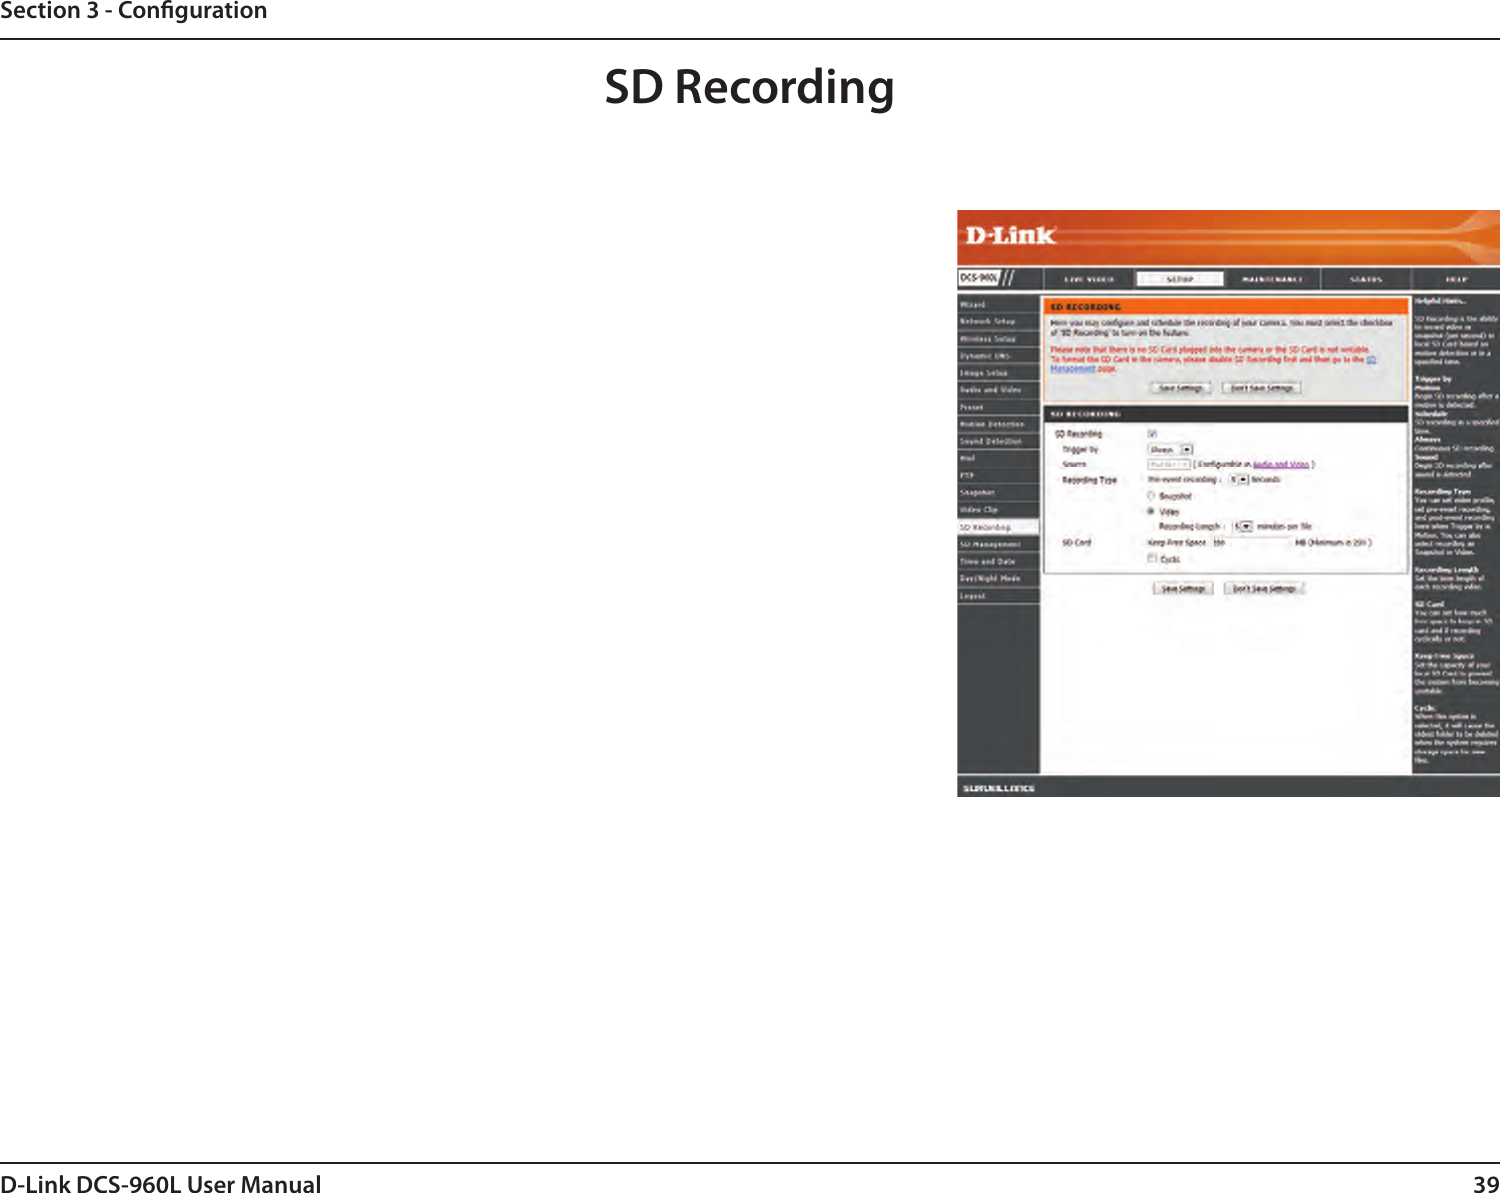 39D-Link DCS-960L User ManualSection 3 - CongurationSD Recording